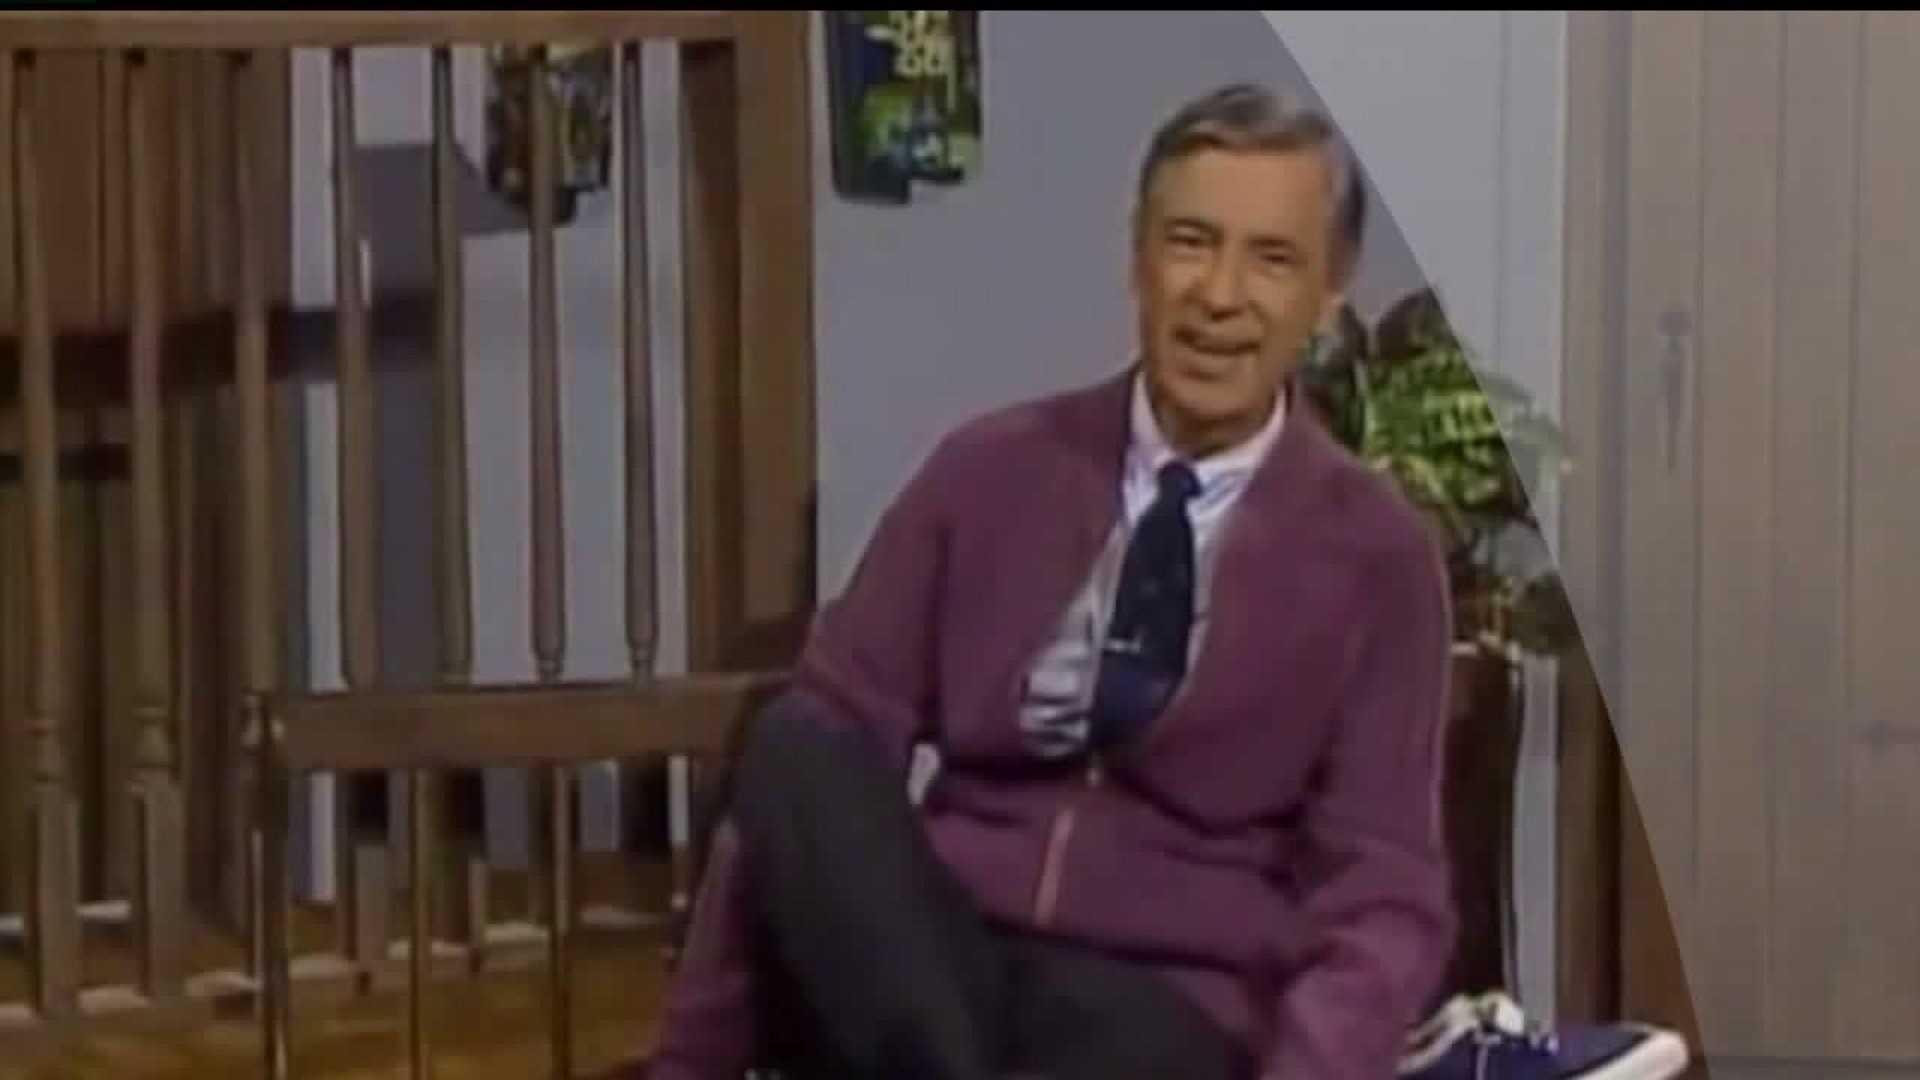 It`s a beautiful day in Central Pennsylvania to spread kindness and honor Mister Rogers